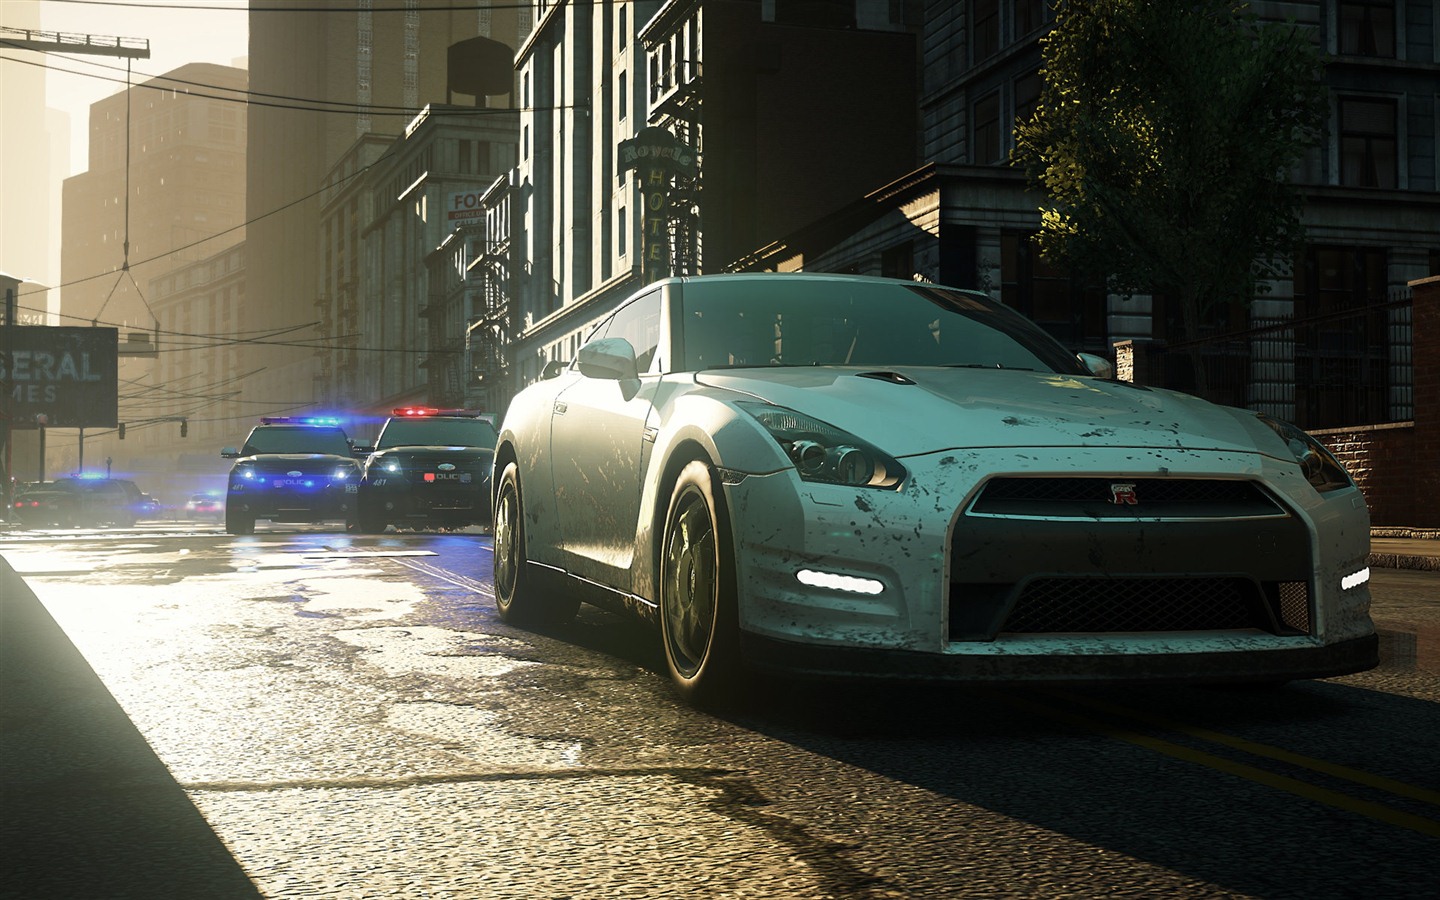 Need for Speed: Most Wanted 极品飞车17：最高通缉 高清壁纸20 - 1440x900